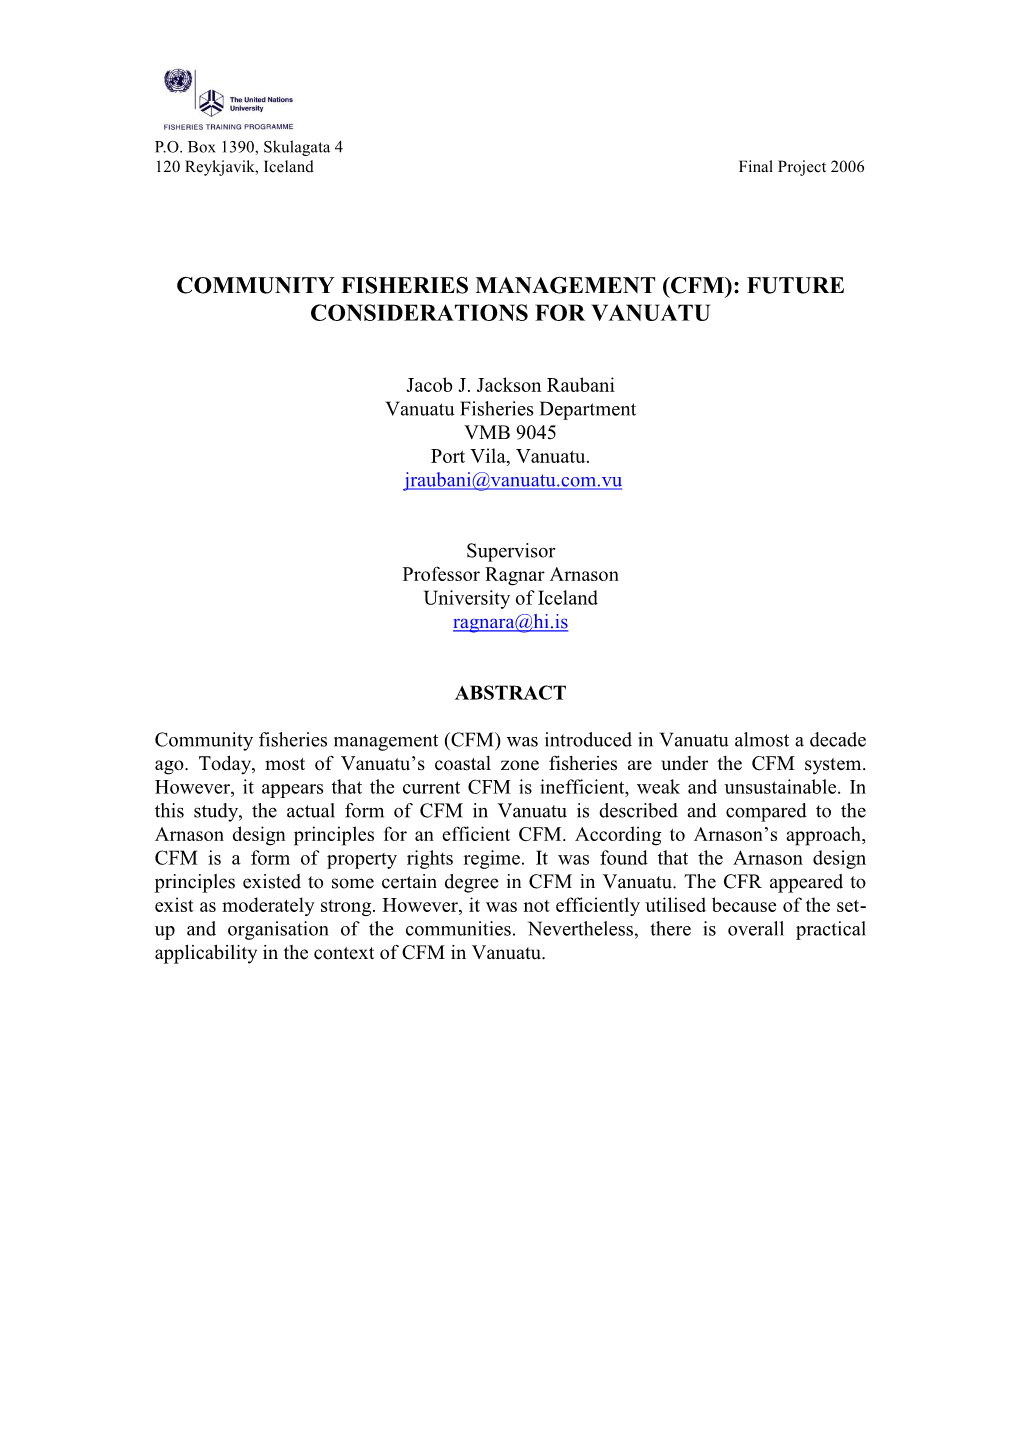 Community Fisheries Management (CFM): Future Consideration For